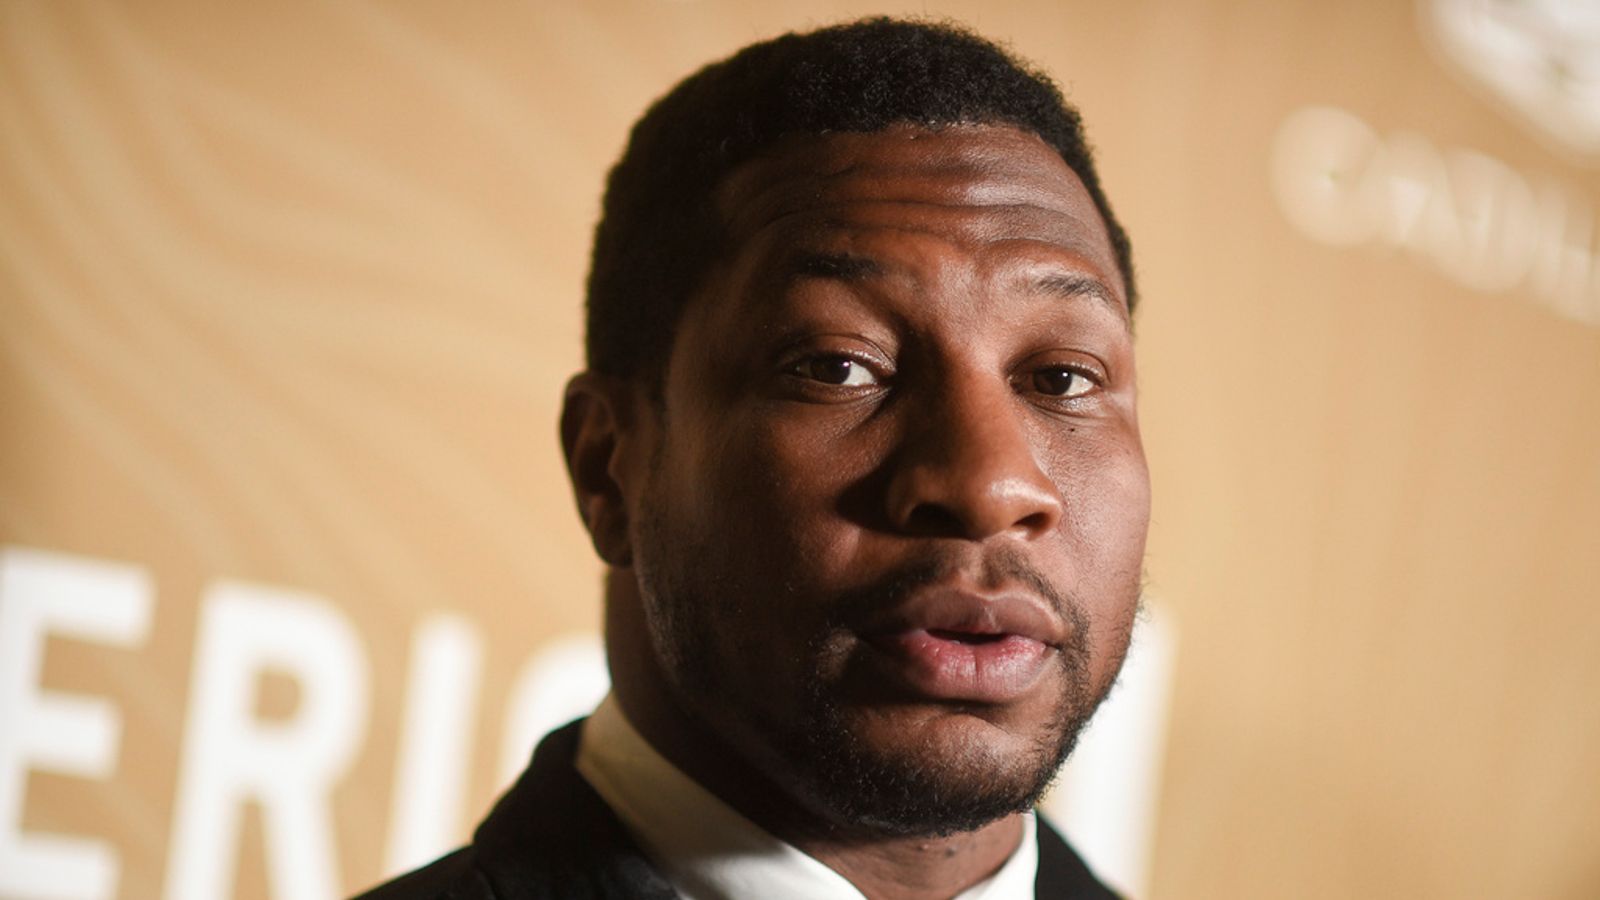 Ant-Man actor Jonathan Majors arrested on assault charge in New York after 'domestic dispute'